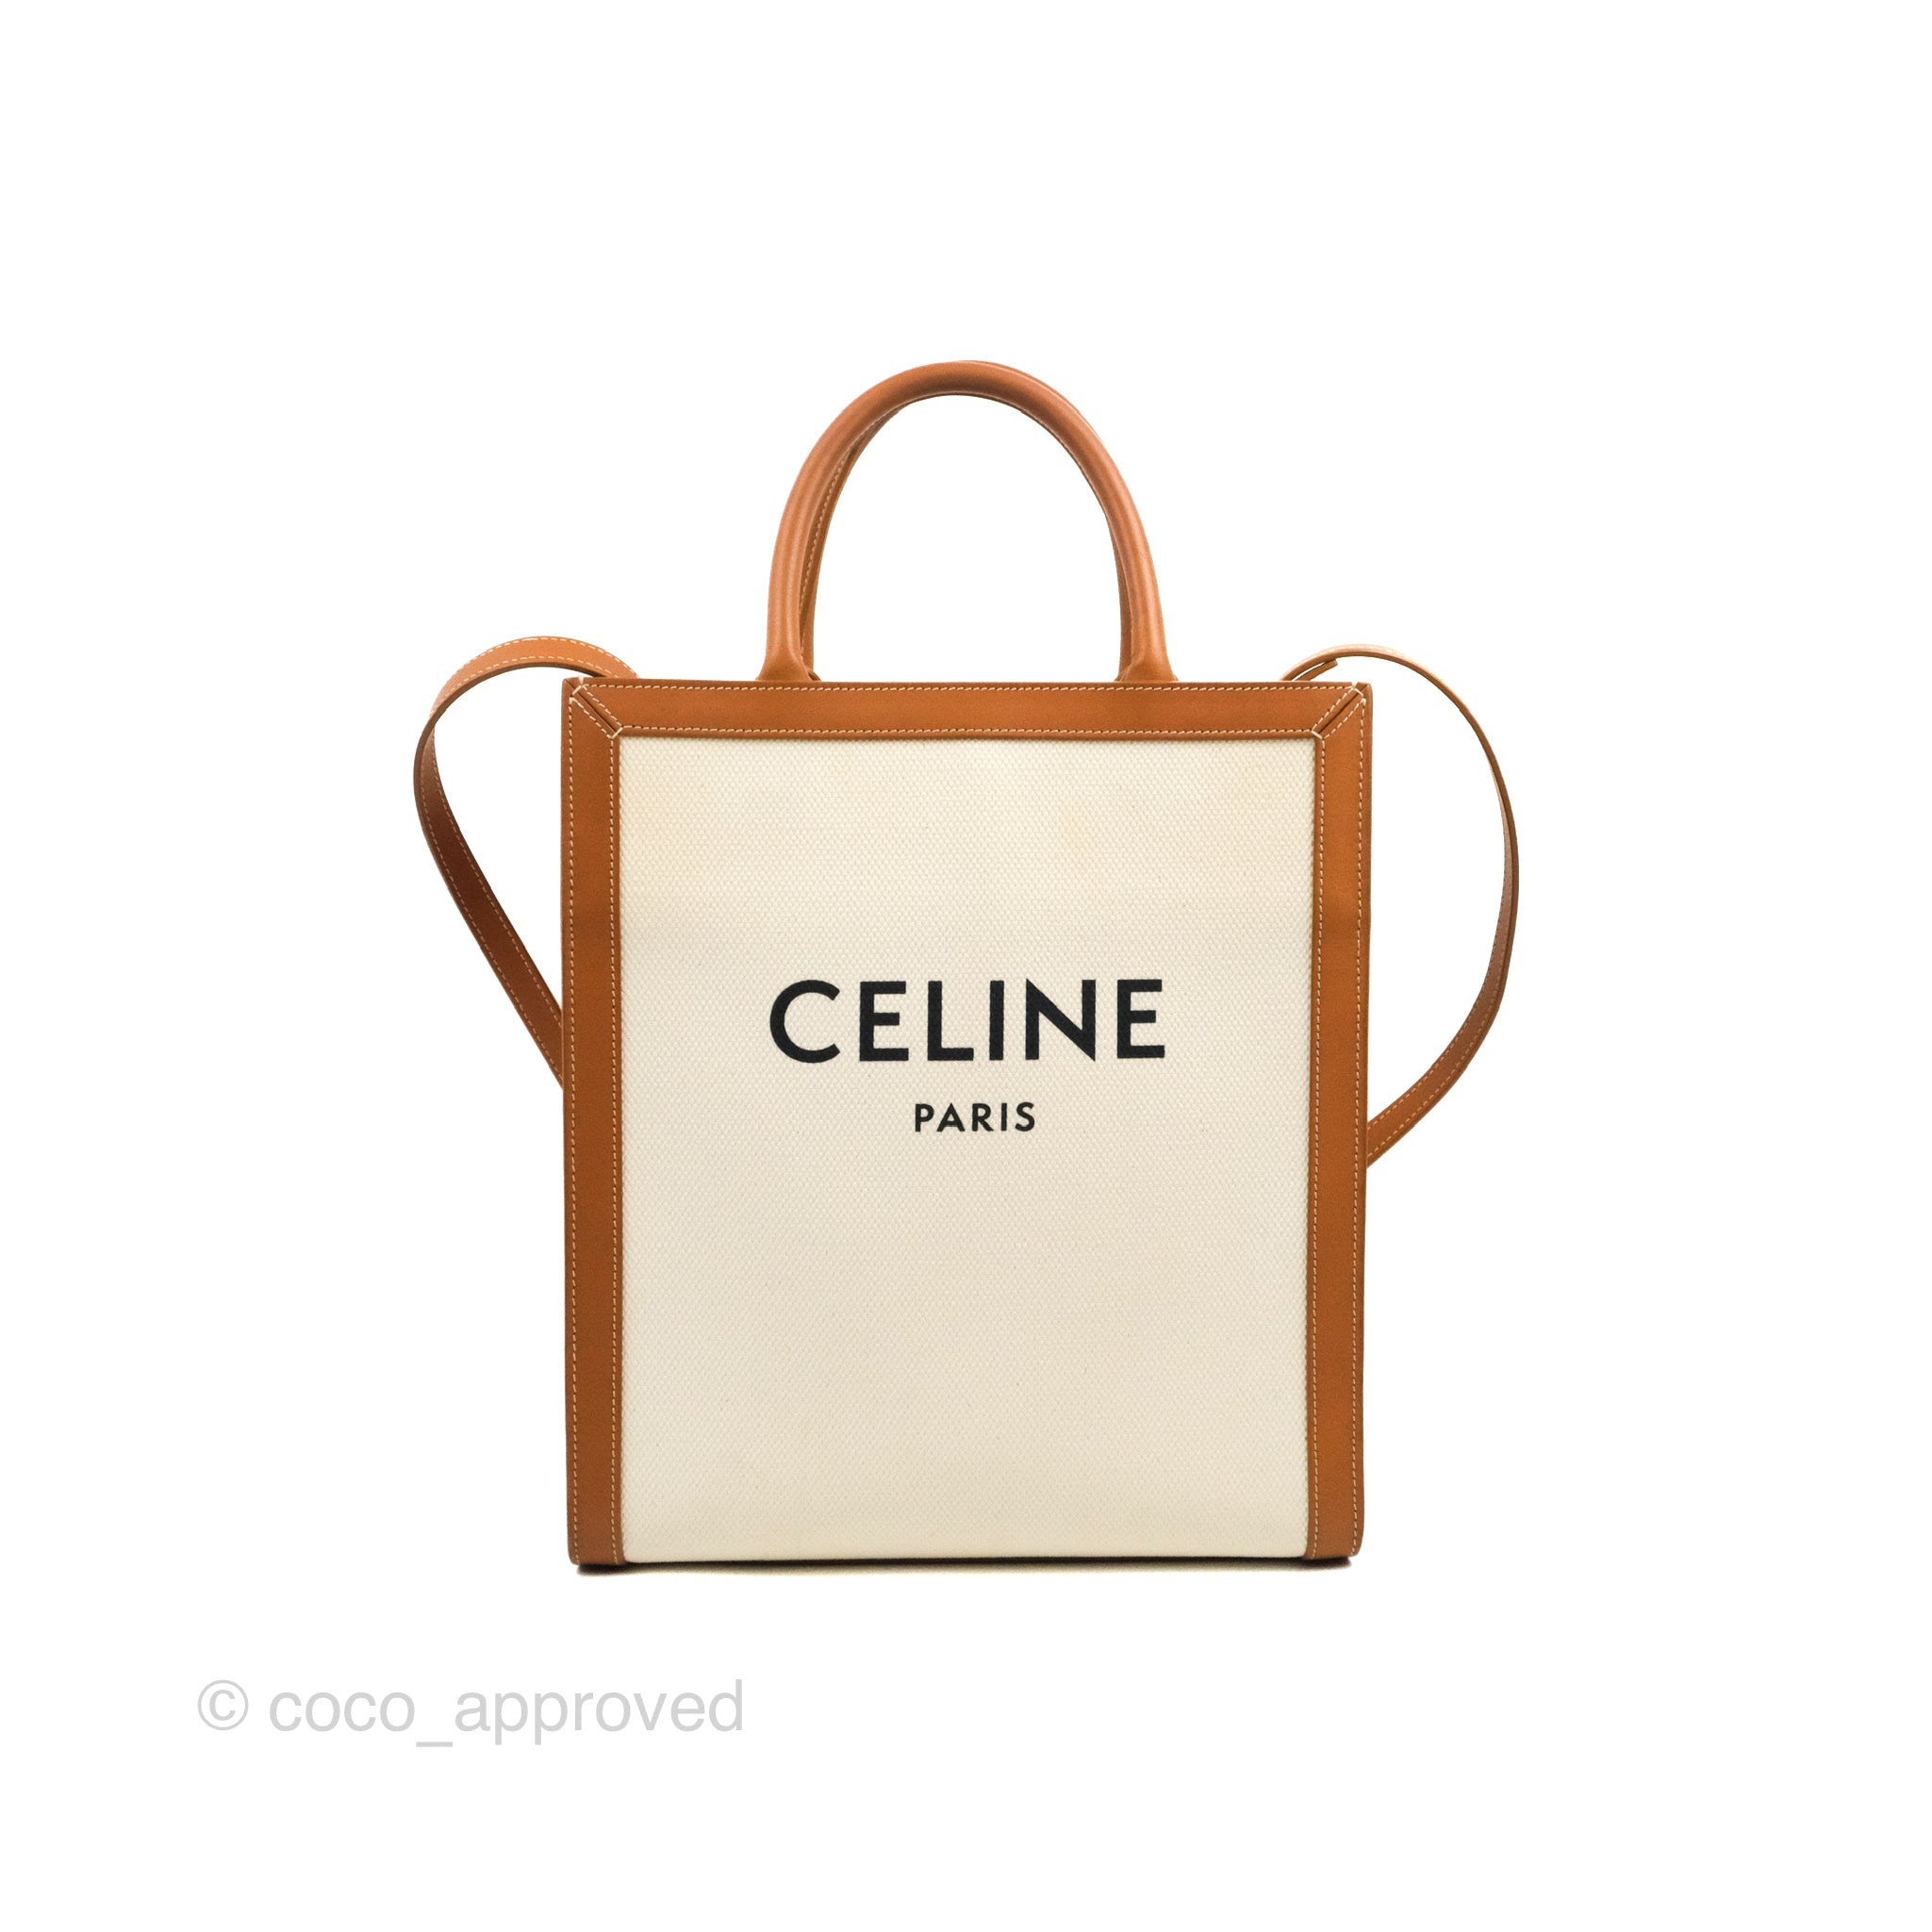 Celine - Mini Vertical Cabas in Triomphe Canvas and Calfskin White for Women - 24S